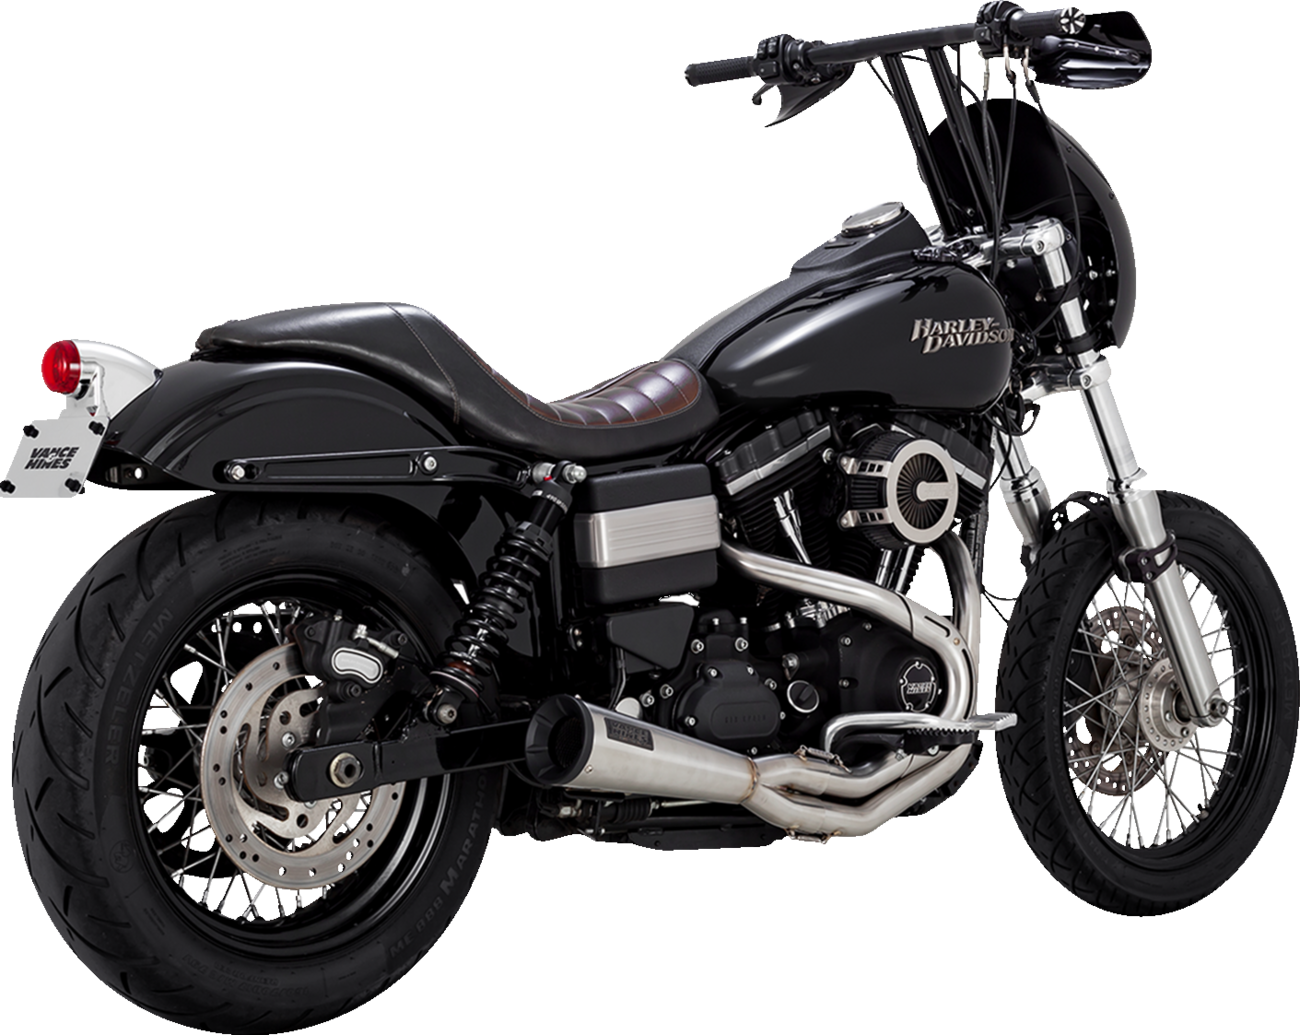 Vance & Hines Upsweep 2-1 Brushed Exhaust System fits 2010-2017 Harley Dyna FXD